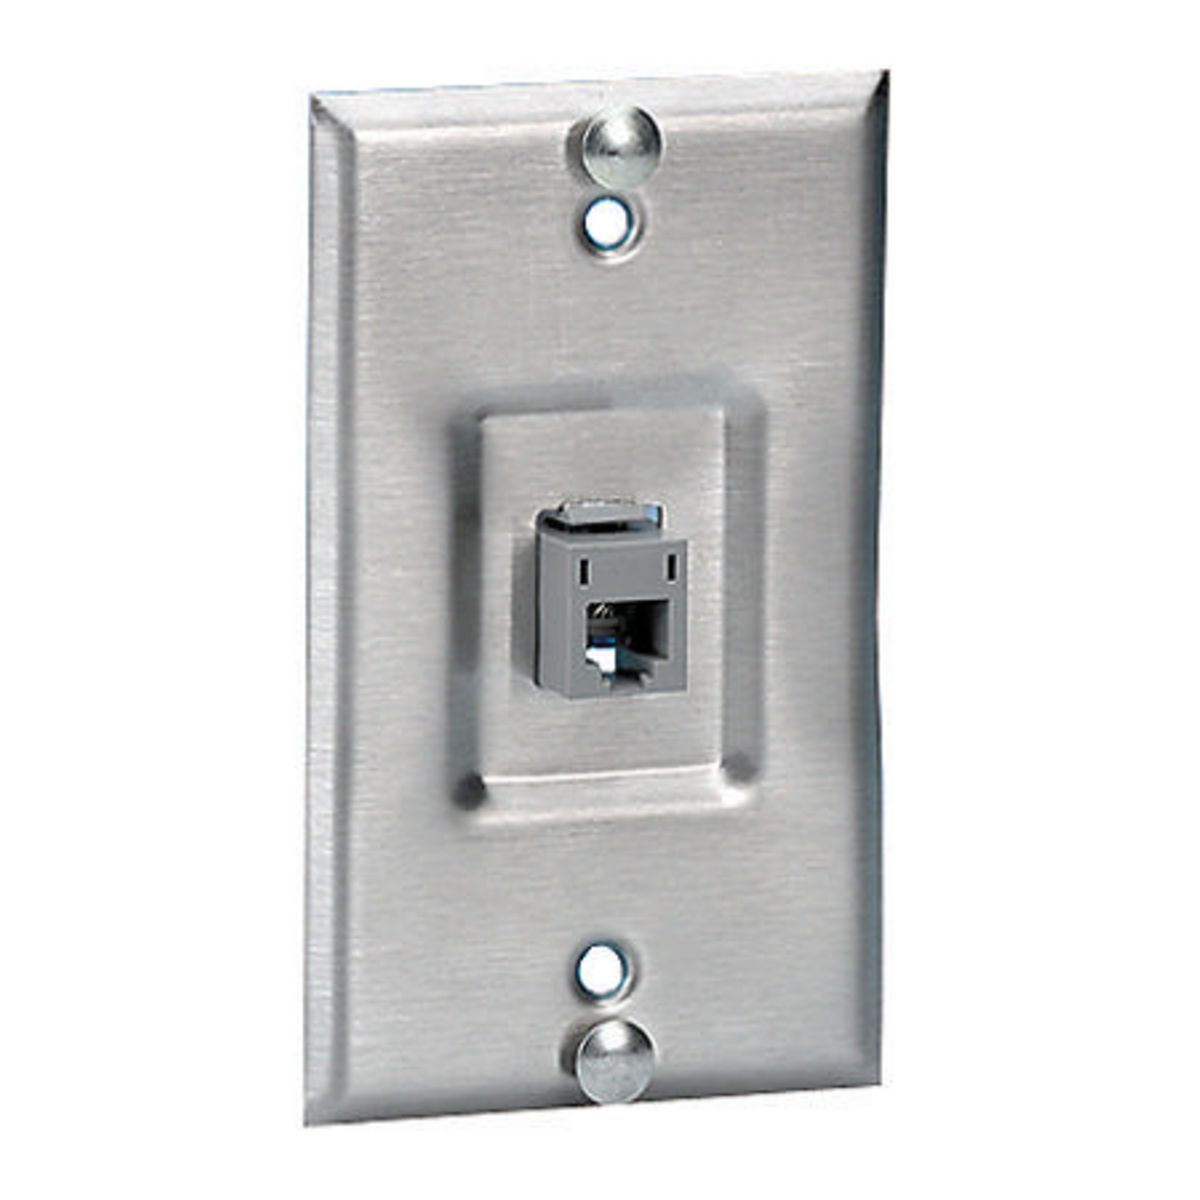 Hubbell Premise Wiring Products, Copper Products, Wallphone Plate, USOC,1-Gang, 1-Port, Recessed, Stainless Steel